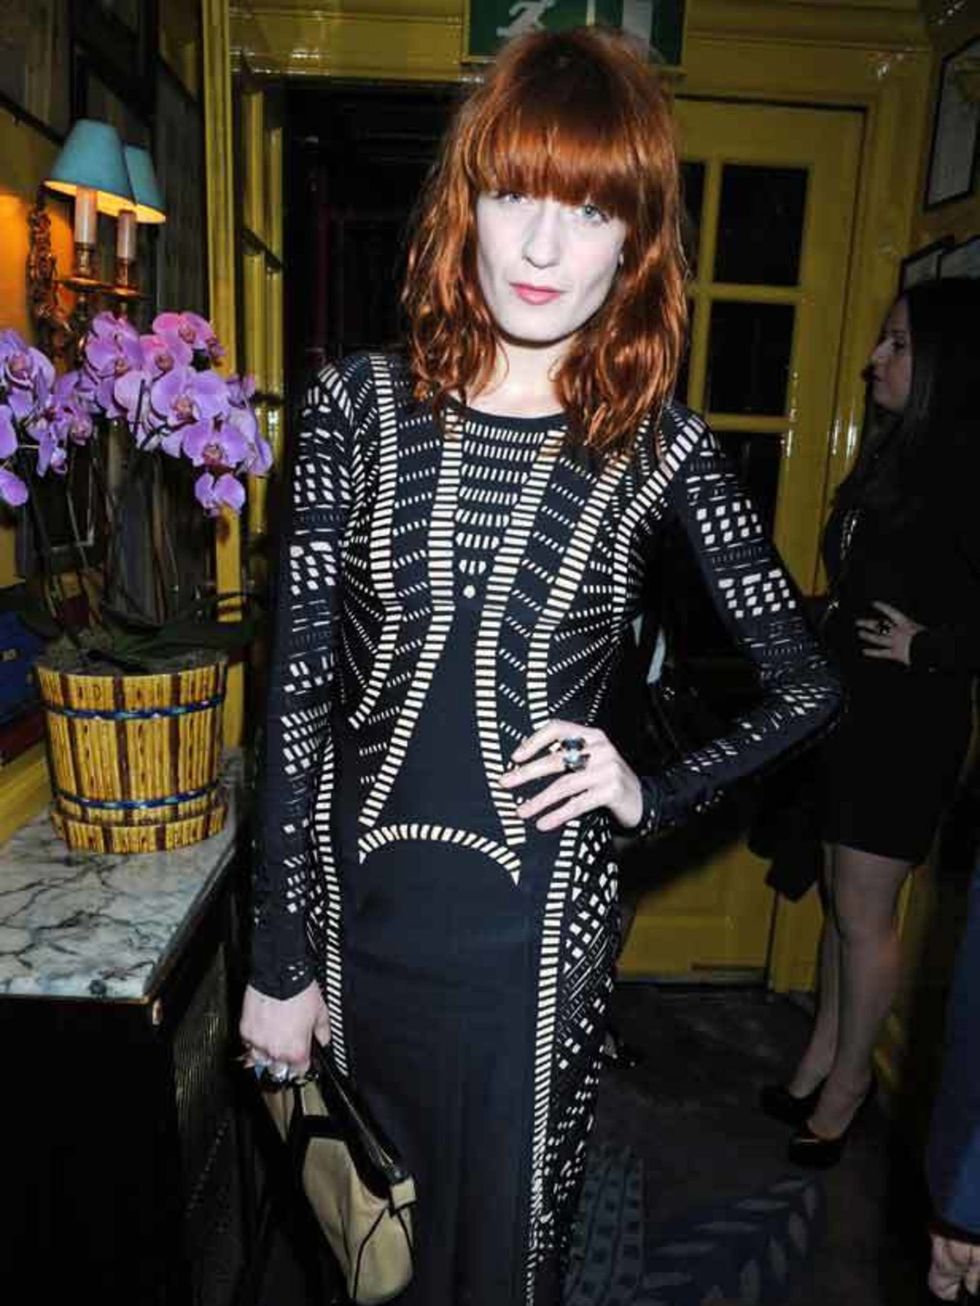 <p><a href="http://www.elleuk.com/starstyle/style-files/(section)/florence-welch">Florence Welch</a> wearing <a href="http://www.elleuk.com/catwalk/collections/mark-fast/">Mark Fast</a> for the Lady Gaga special performance at Annabel's in London, May 201